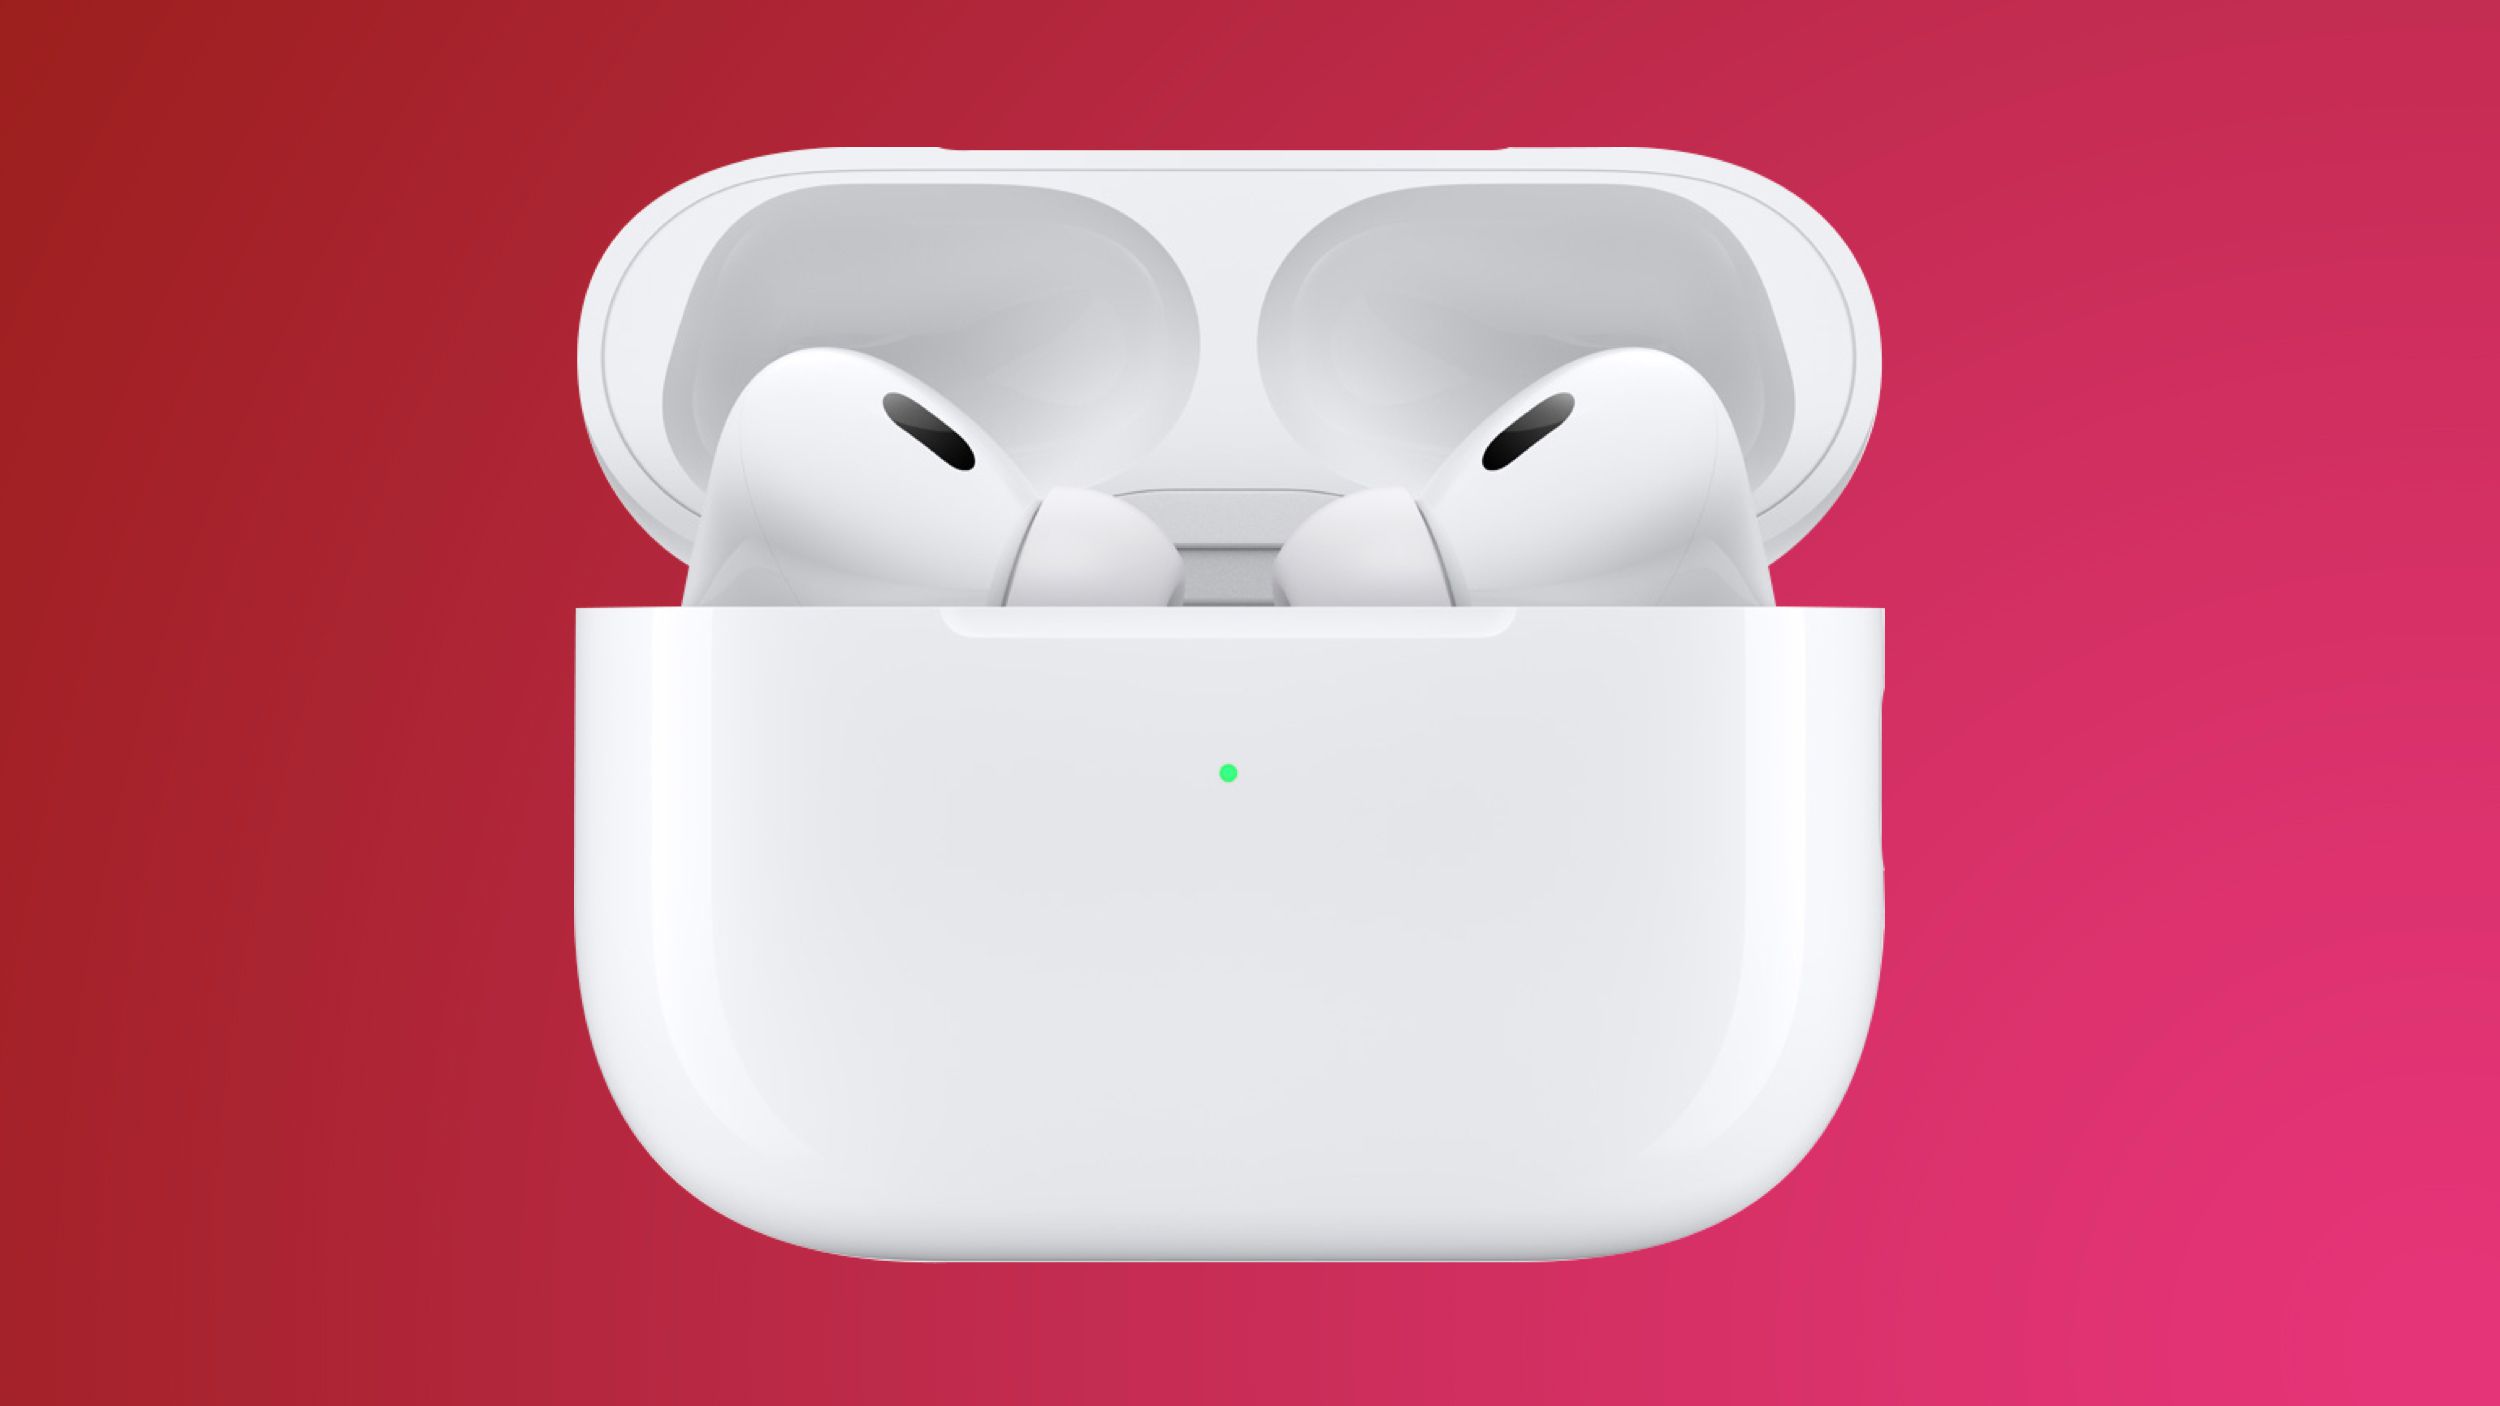 Deals: AirPods Pro 2 on Sale for Best Price of the Year So Far at $199.99 ($49 Off) - macrumors.com